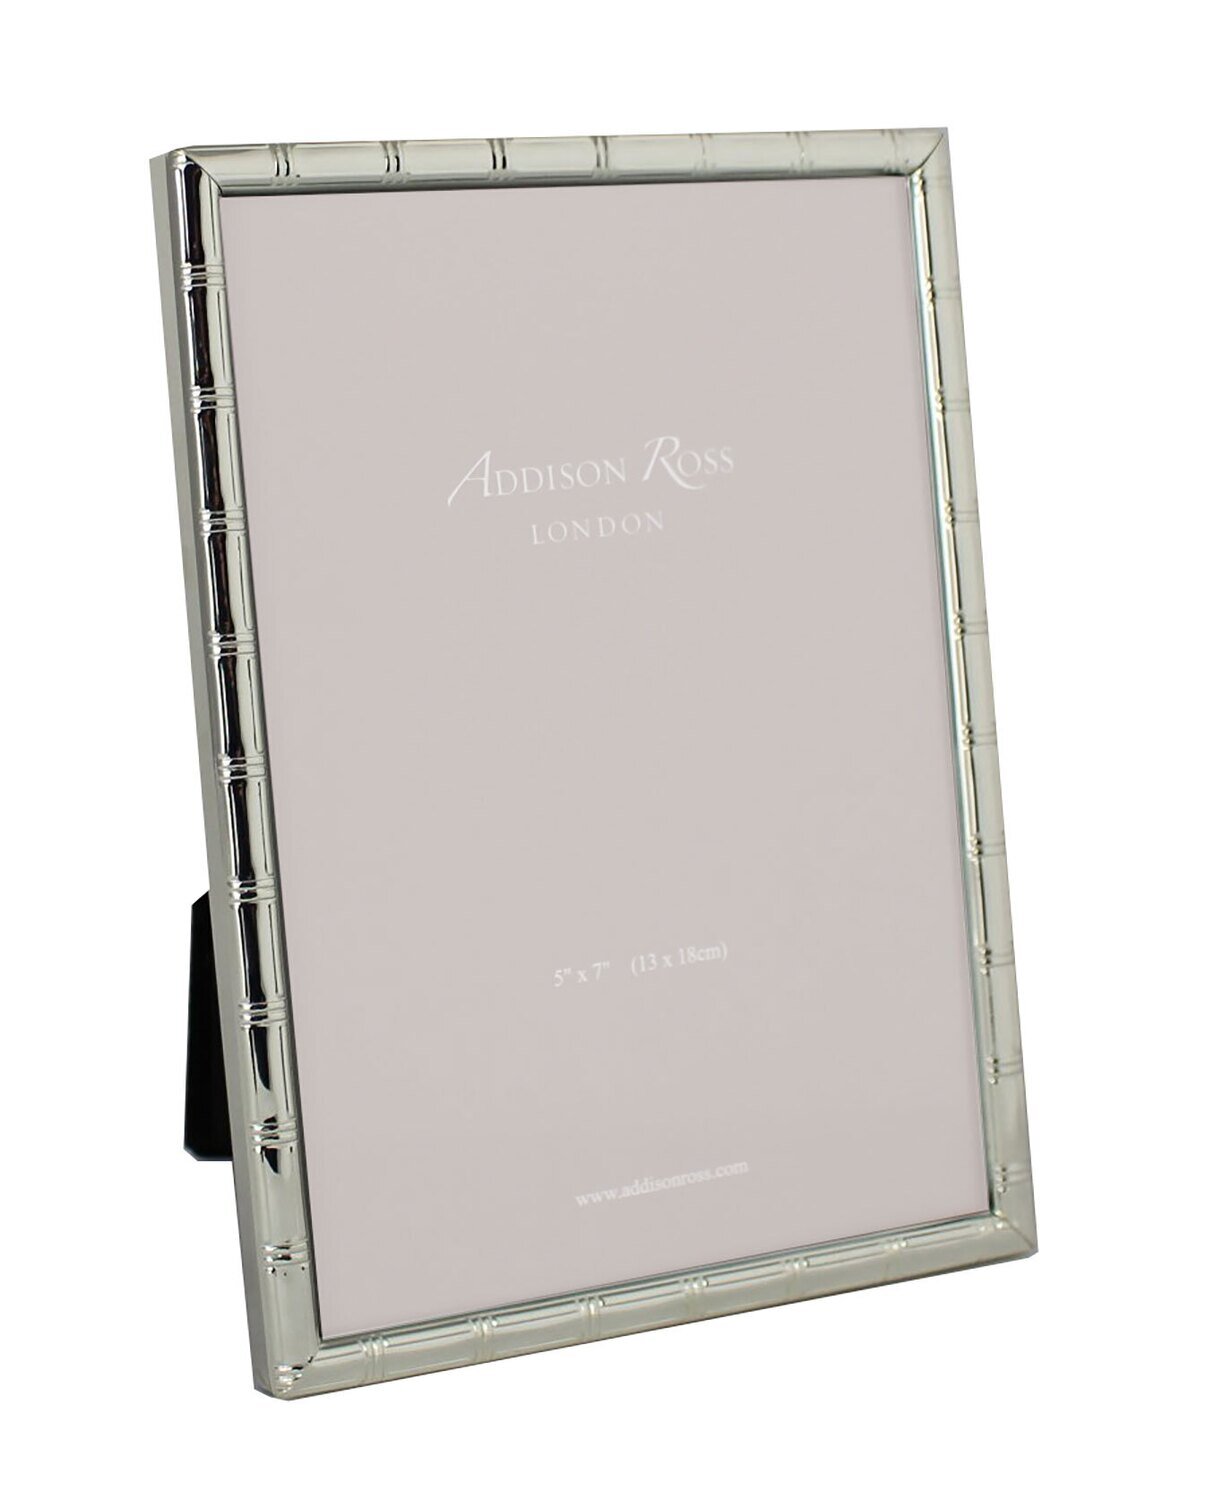 Addison Ross Cane Picture Frame 5 x 7 Inch Silver-plated FR2636